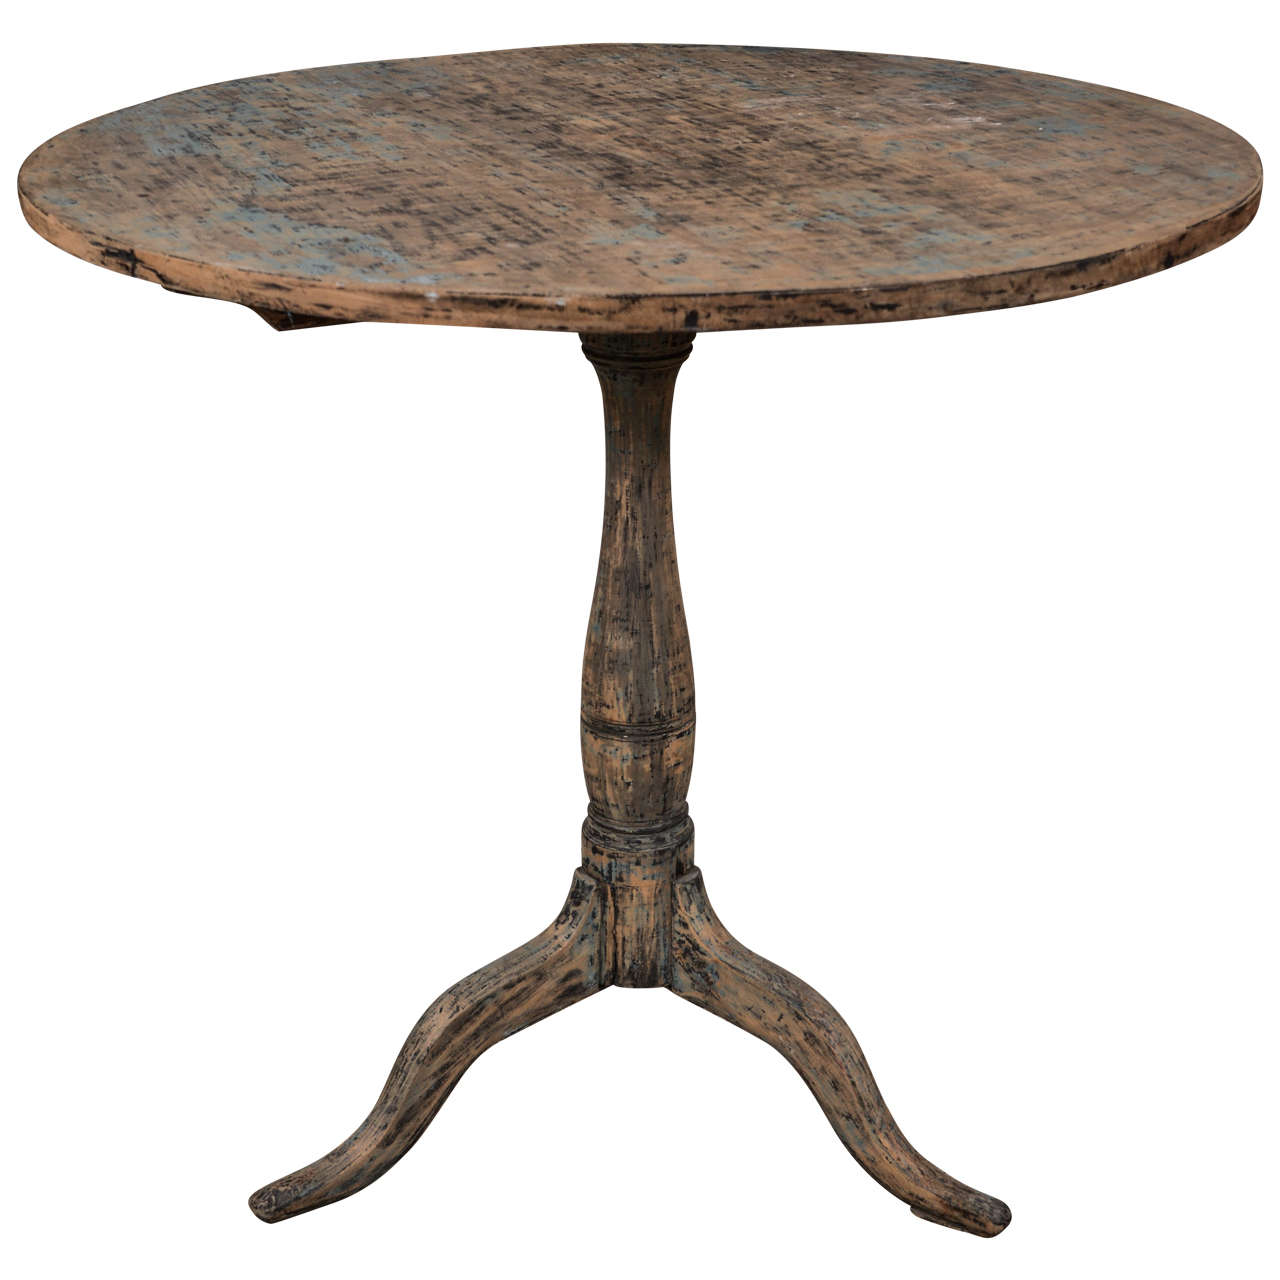 19th Century Tilt-Top Swedish Table with Remnants of Original Paint